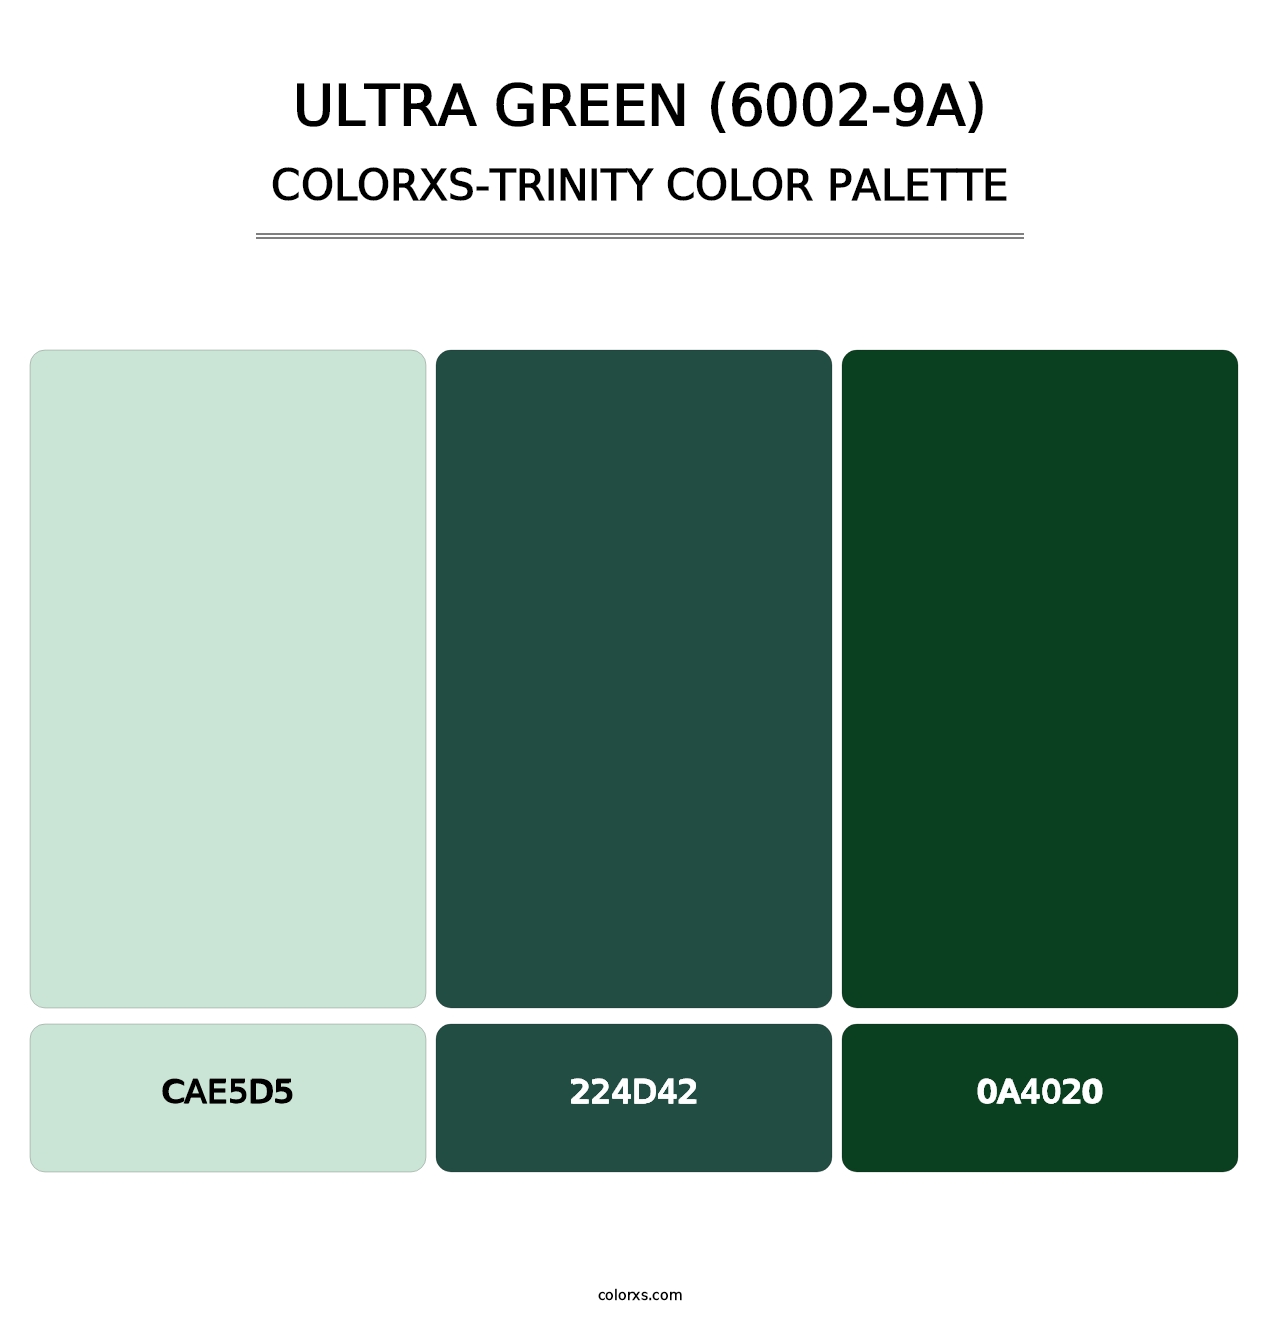 Ultra Green (6002-9A) - Colorxs Trinity Palette